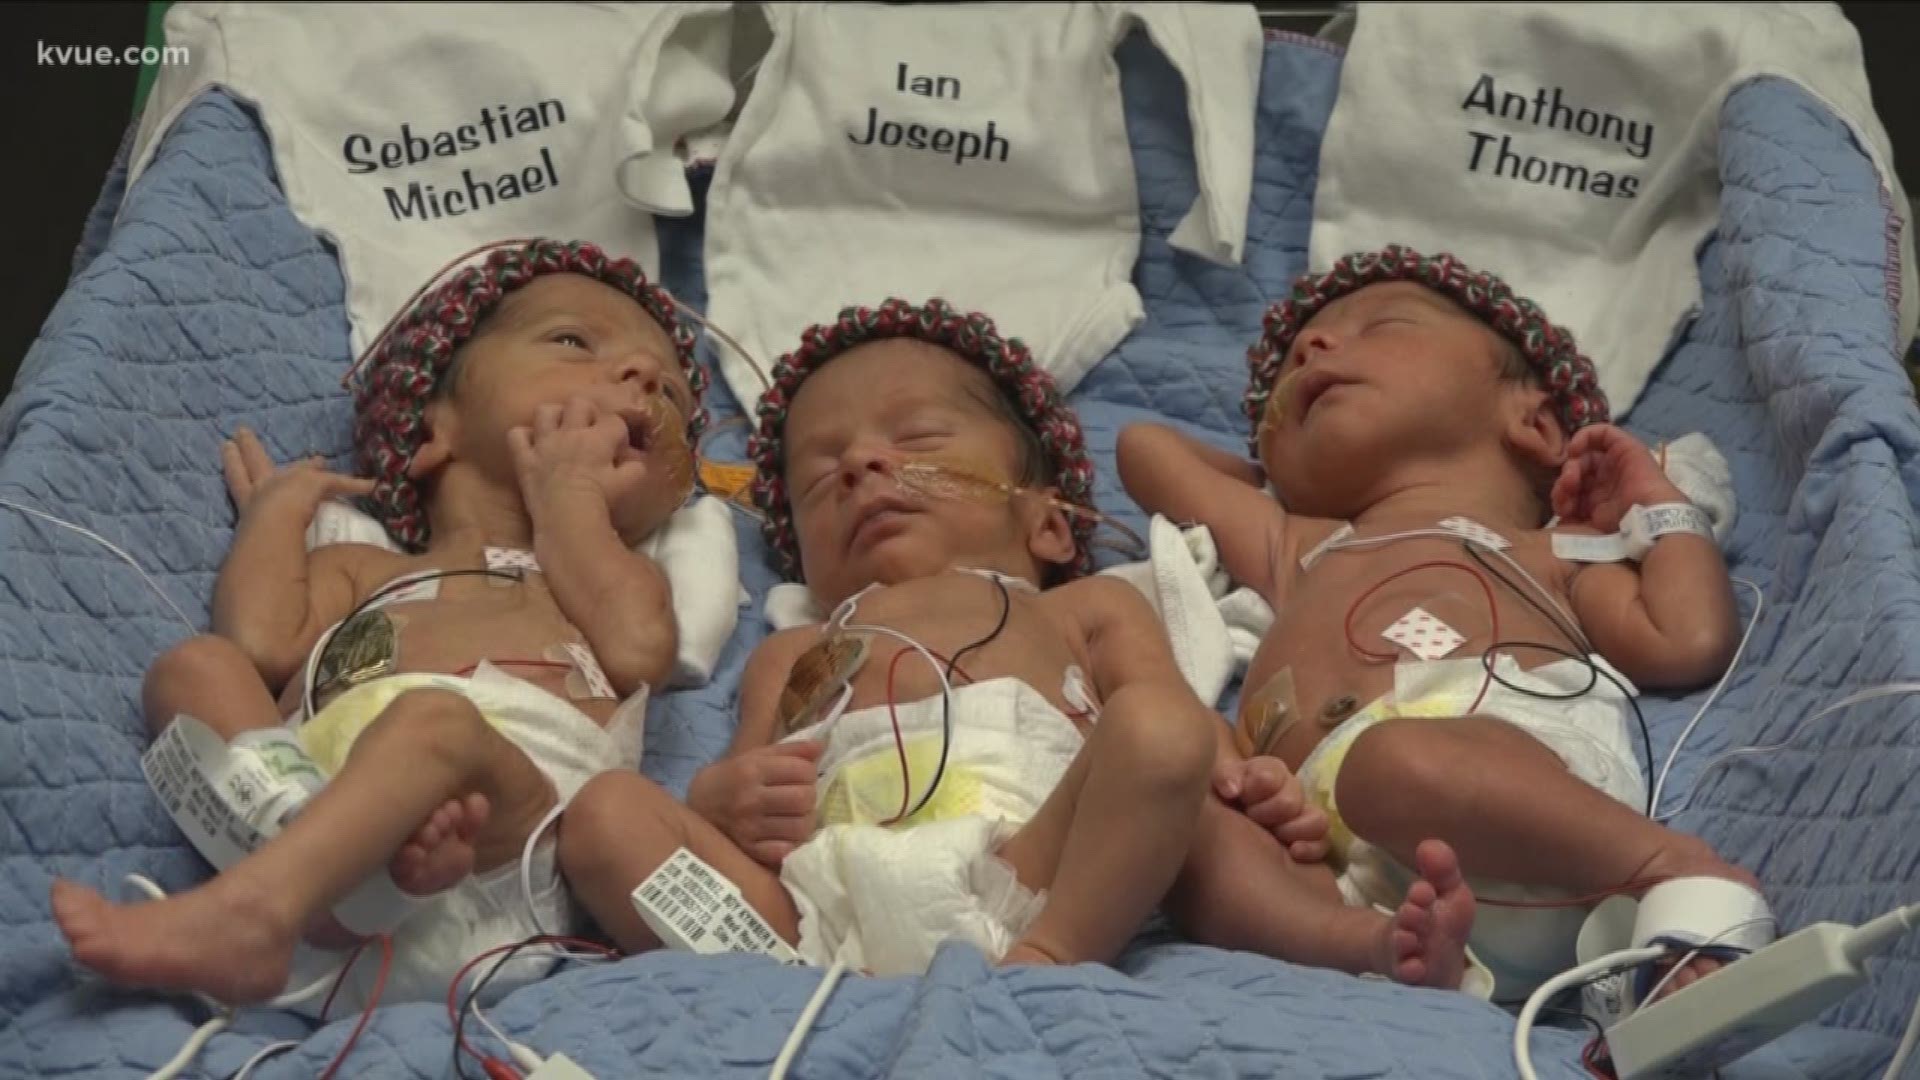 A woman at Seton Medical Center Hays gave birth to triplets naturally -- which is a rare way to deliver triplets.